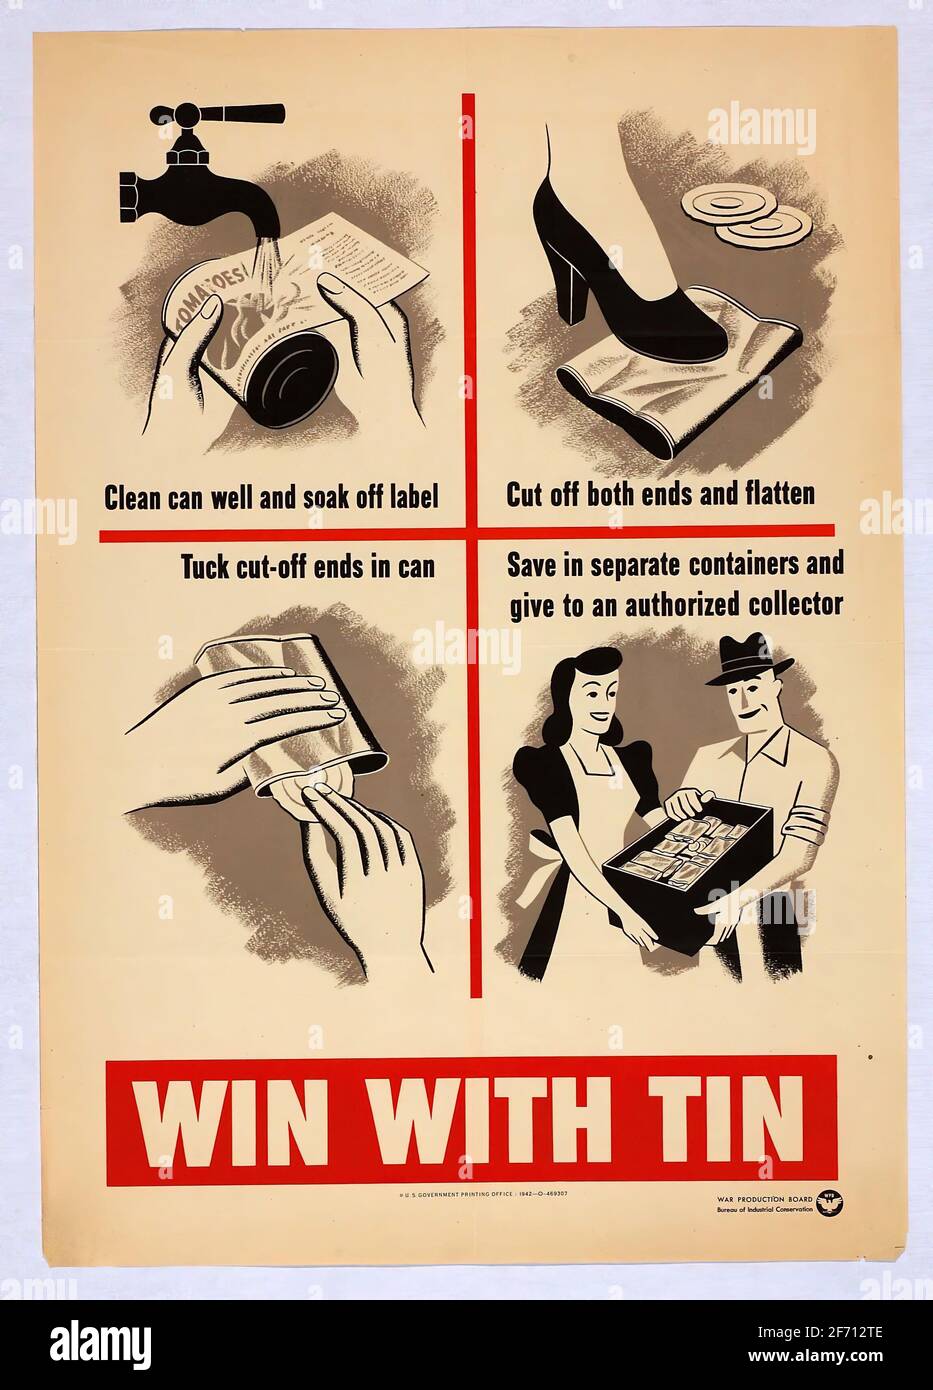 A vintage WW2 poster promoting scrap metal recycling saying Win With Tin Stock Photo